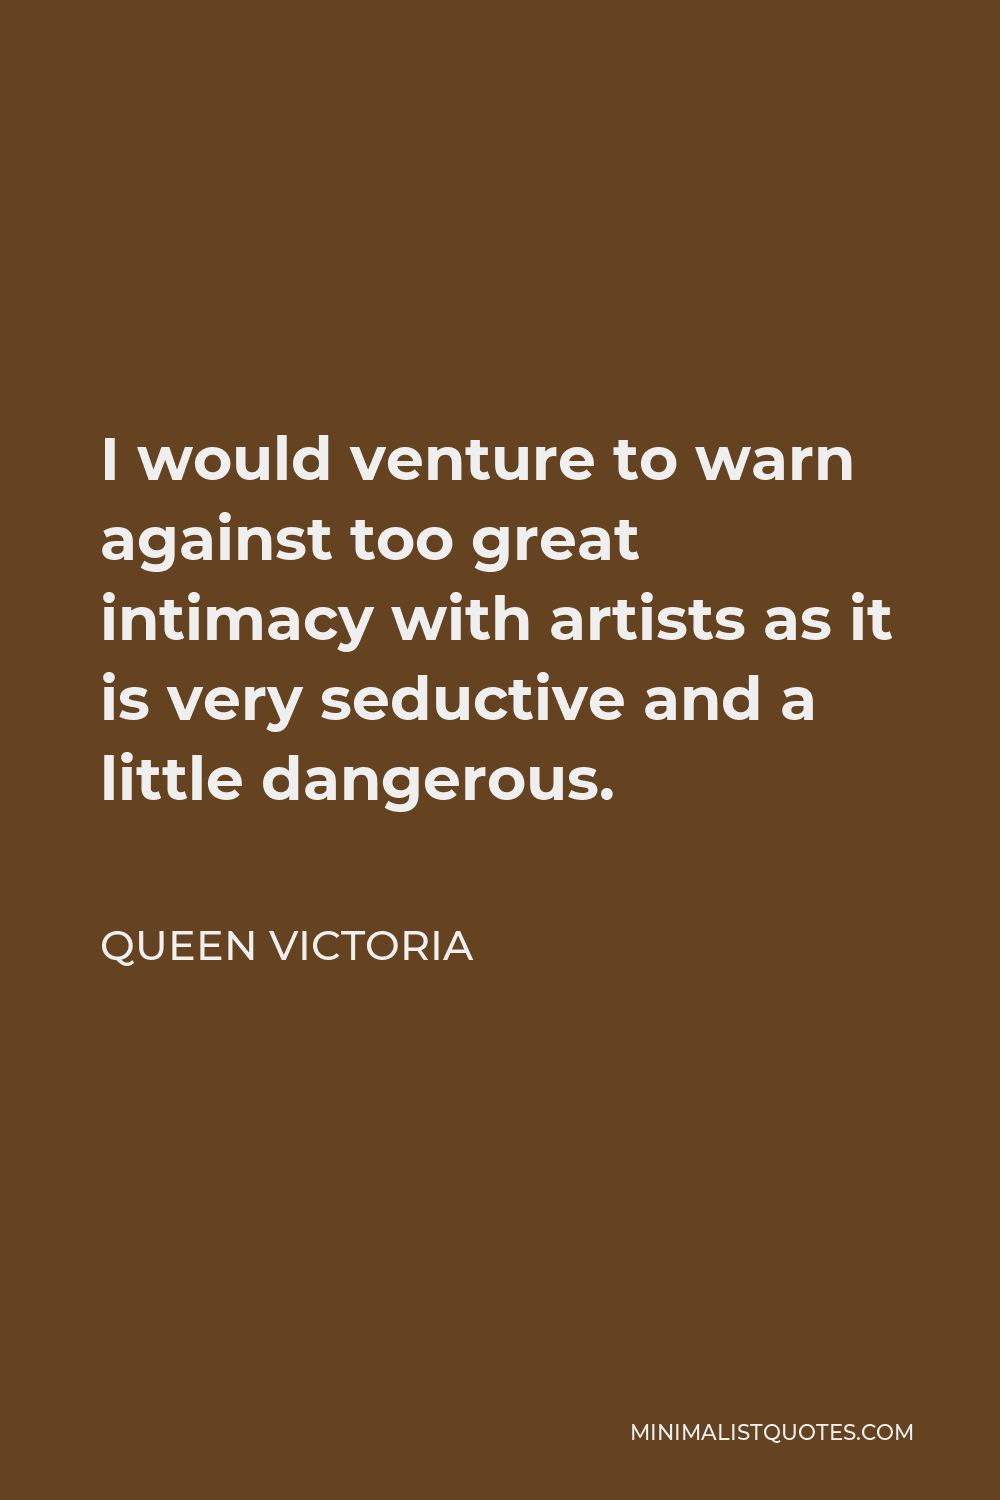 Queen Victoria Quote - I would venture to warn against too great intimacy with artists as it is very seductive and a little dangerous.